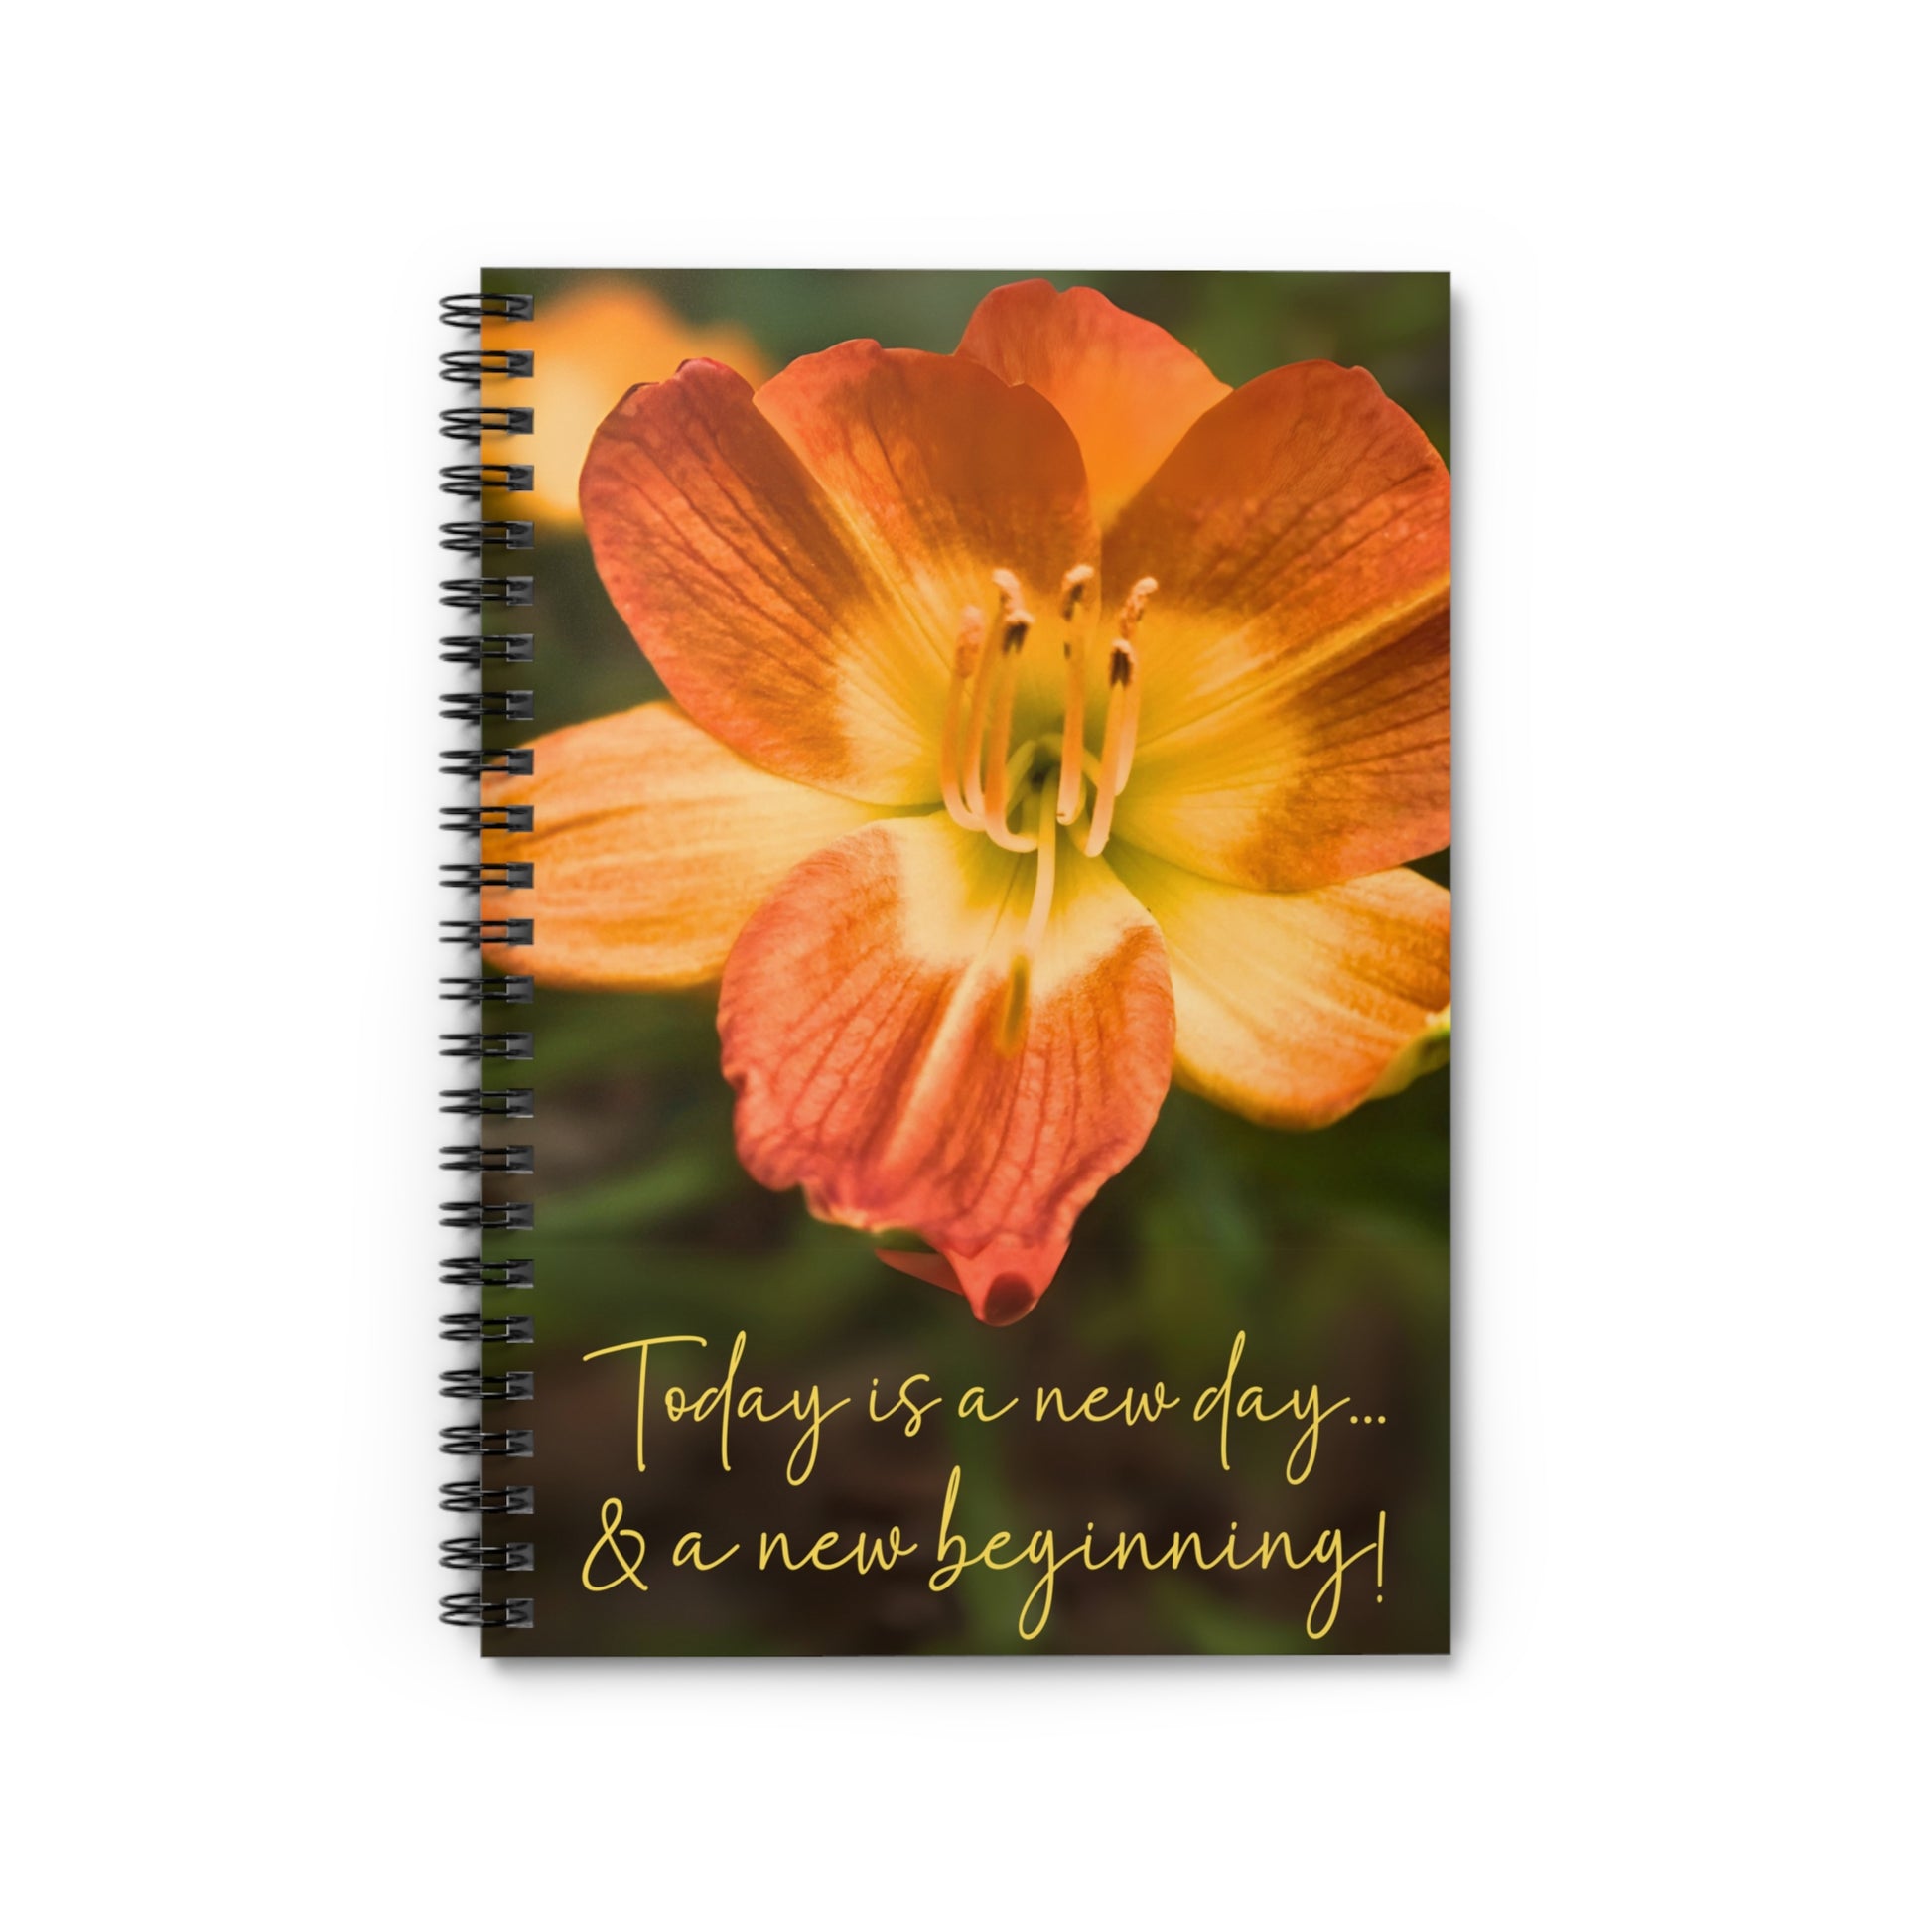 Positivity notebook for well-being for gift or self, front view.